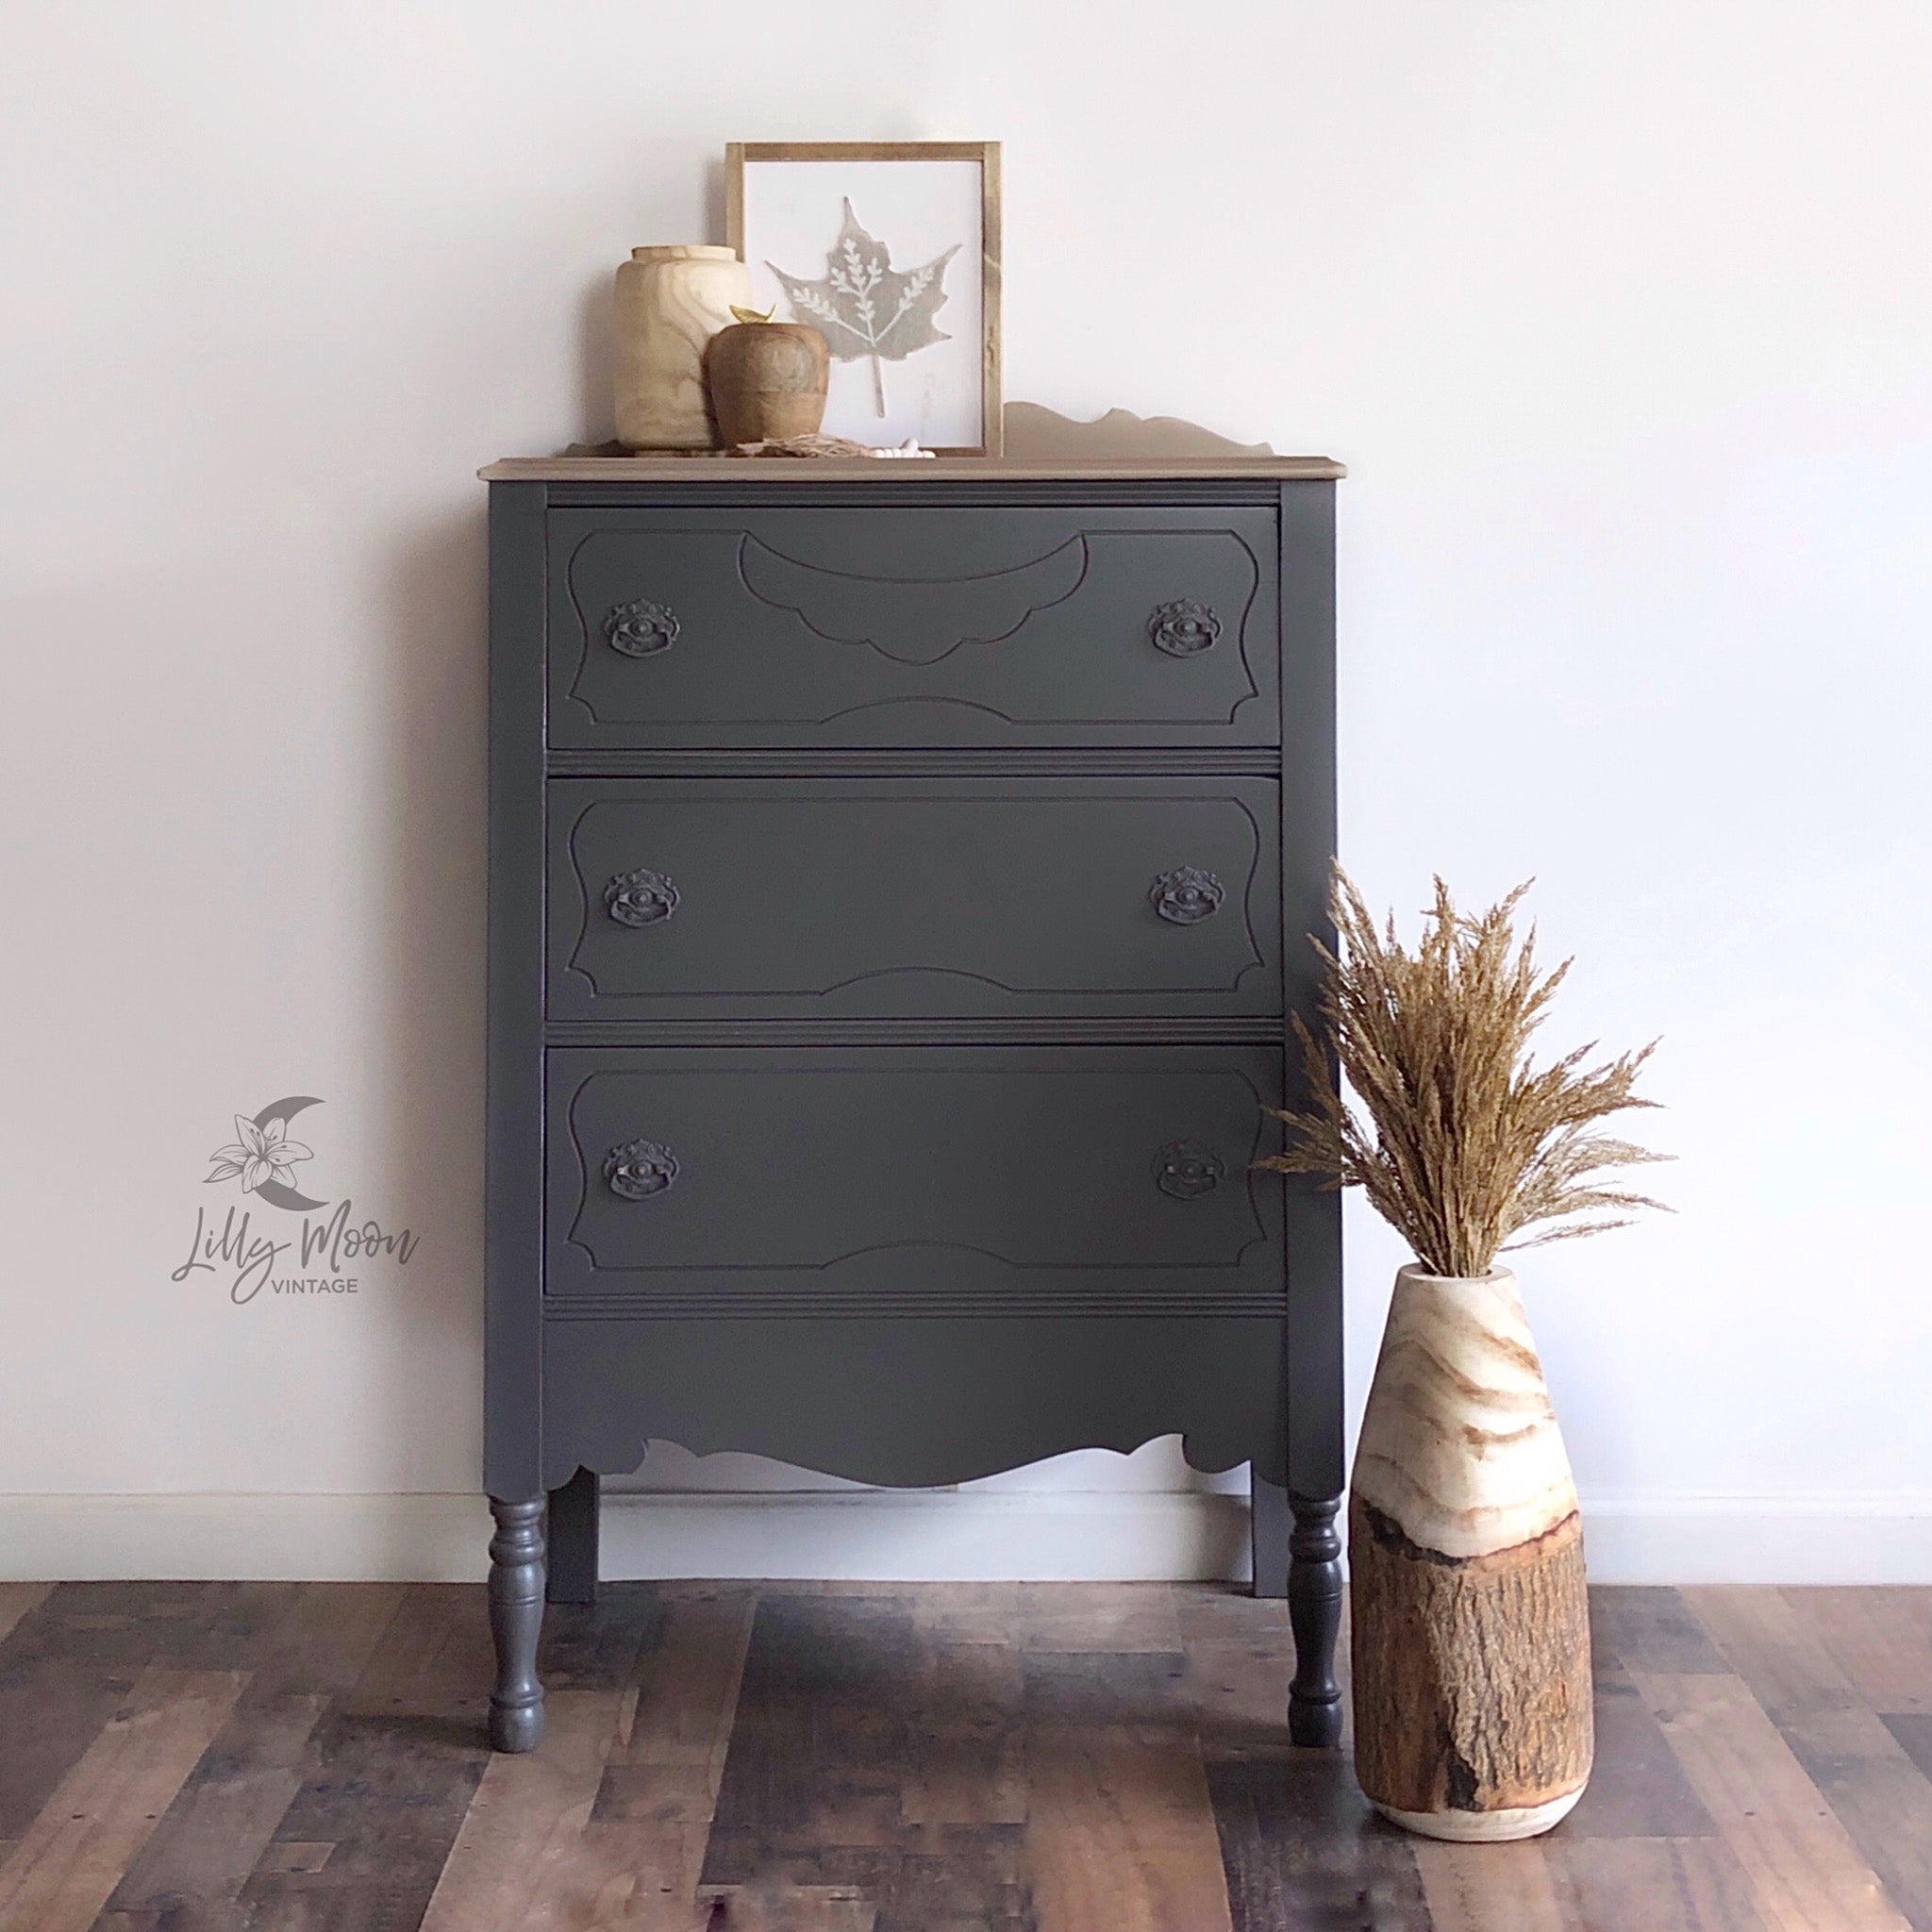 A vintage 3-drawer chest dresser refurbished by Lilly Moon Vintage is painted in Dixie Belle's Gravel Road chalk mineral paint.